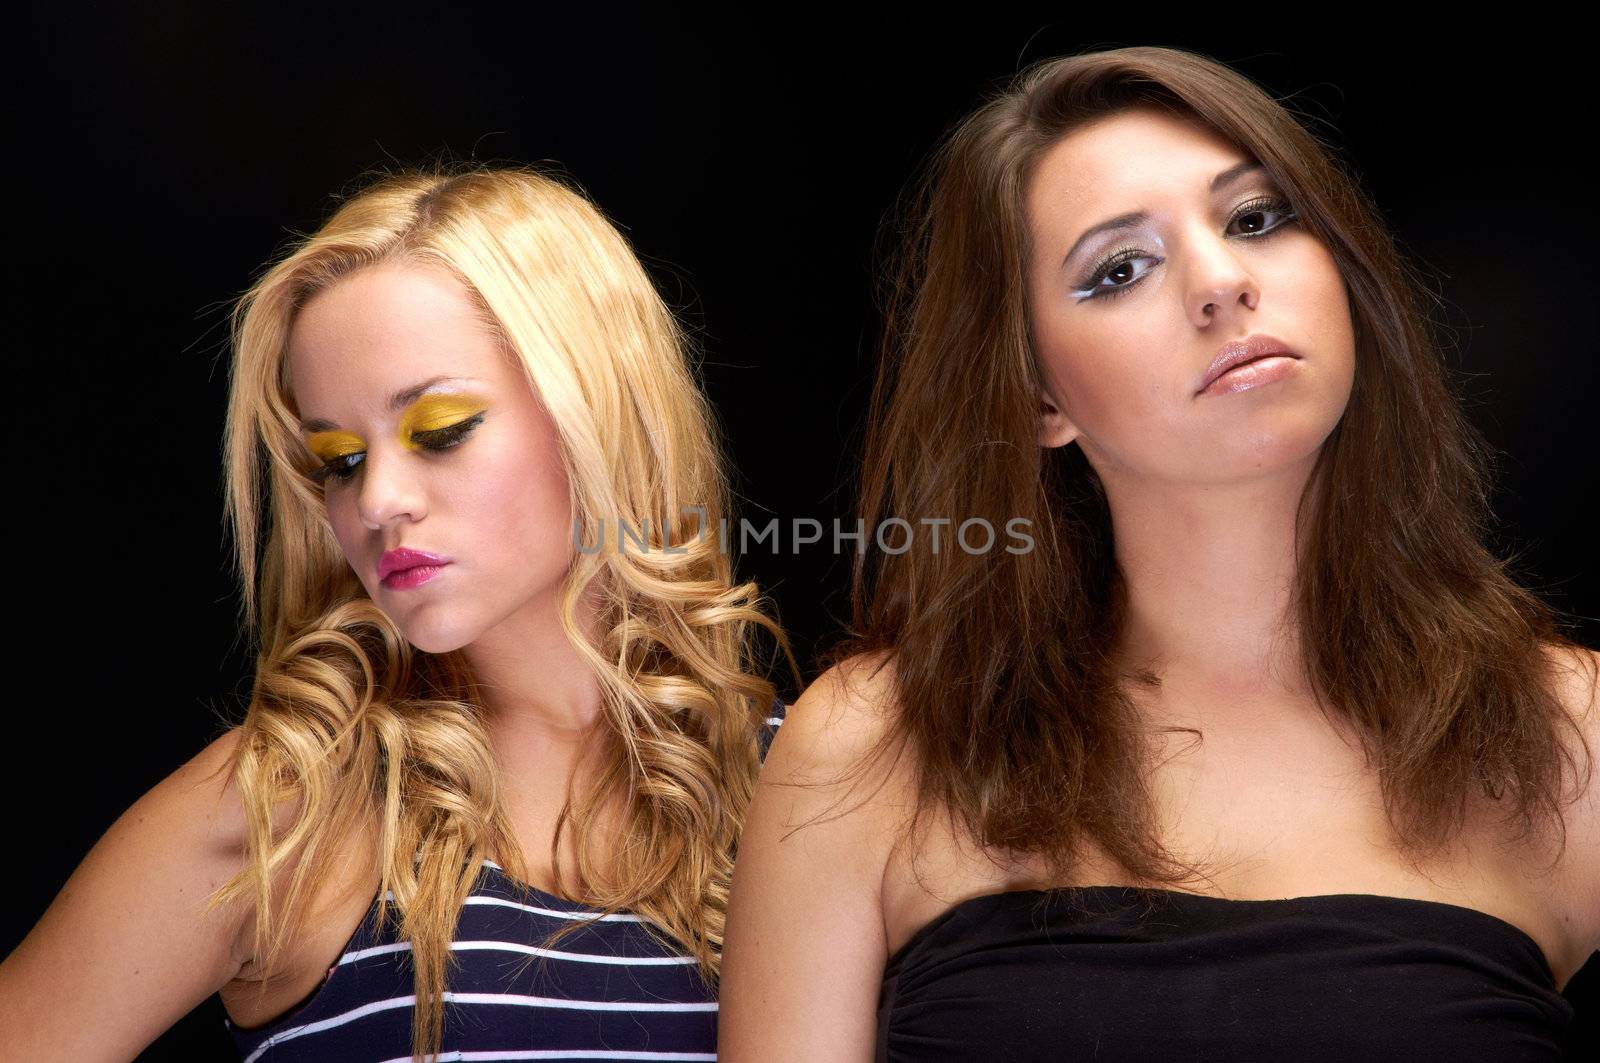 Closeup photo of two young girls in the studio against dark background